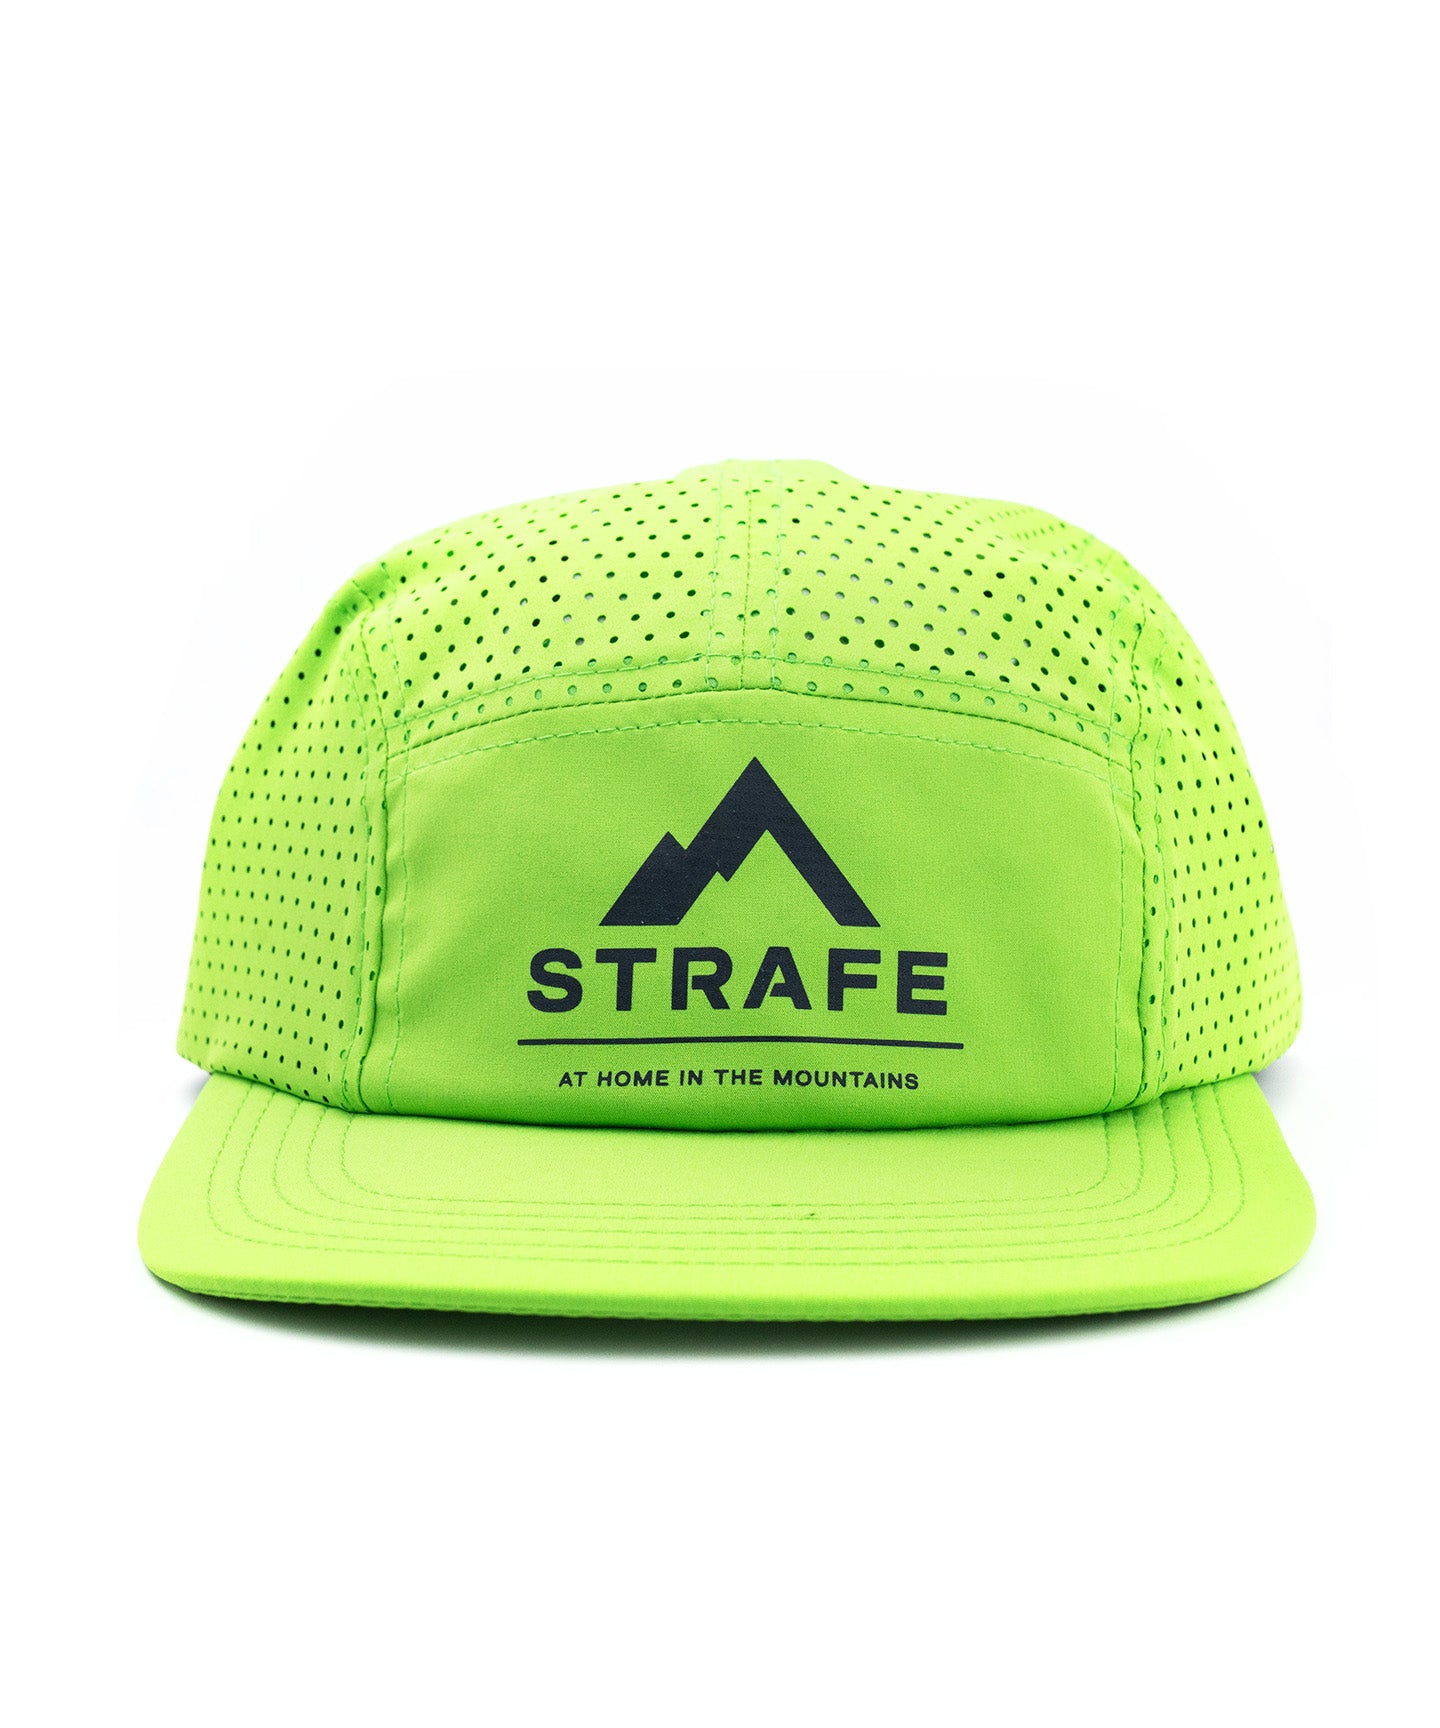 strafe outerwear fall/winter 23/24 collection banger touring hat in battleship 